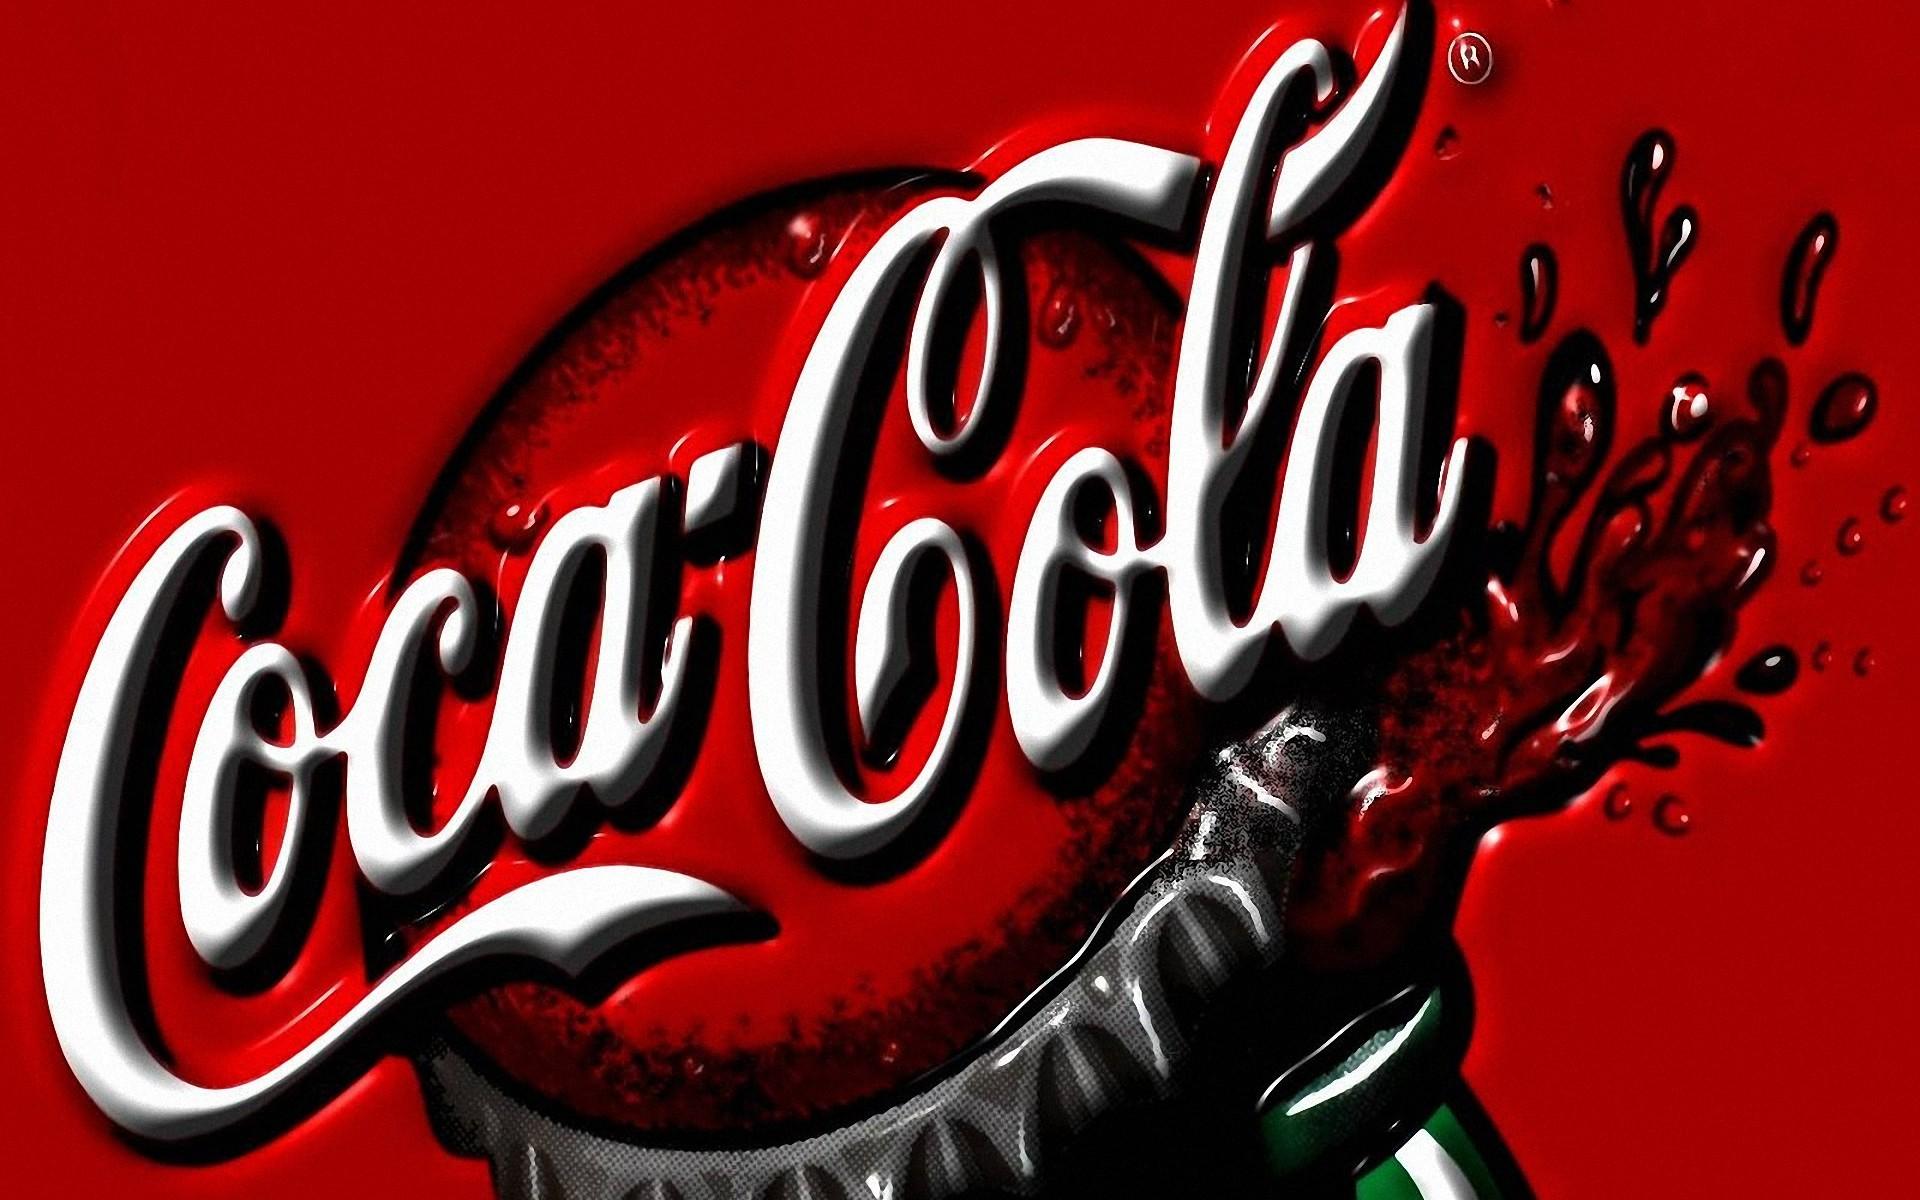 70 Hd Coca Cola Wallpapers And Backgrounds HD Wallpapers Download Free Images Wallpaper [wallpaper981.blogspot.com]